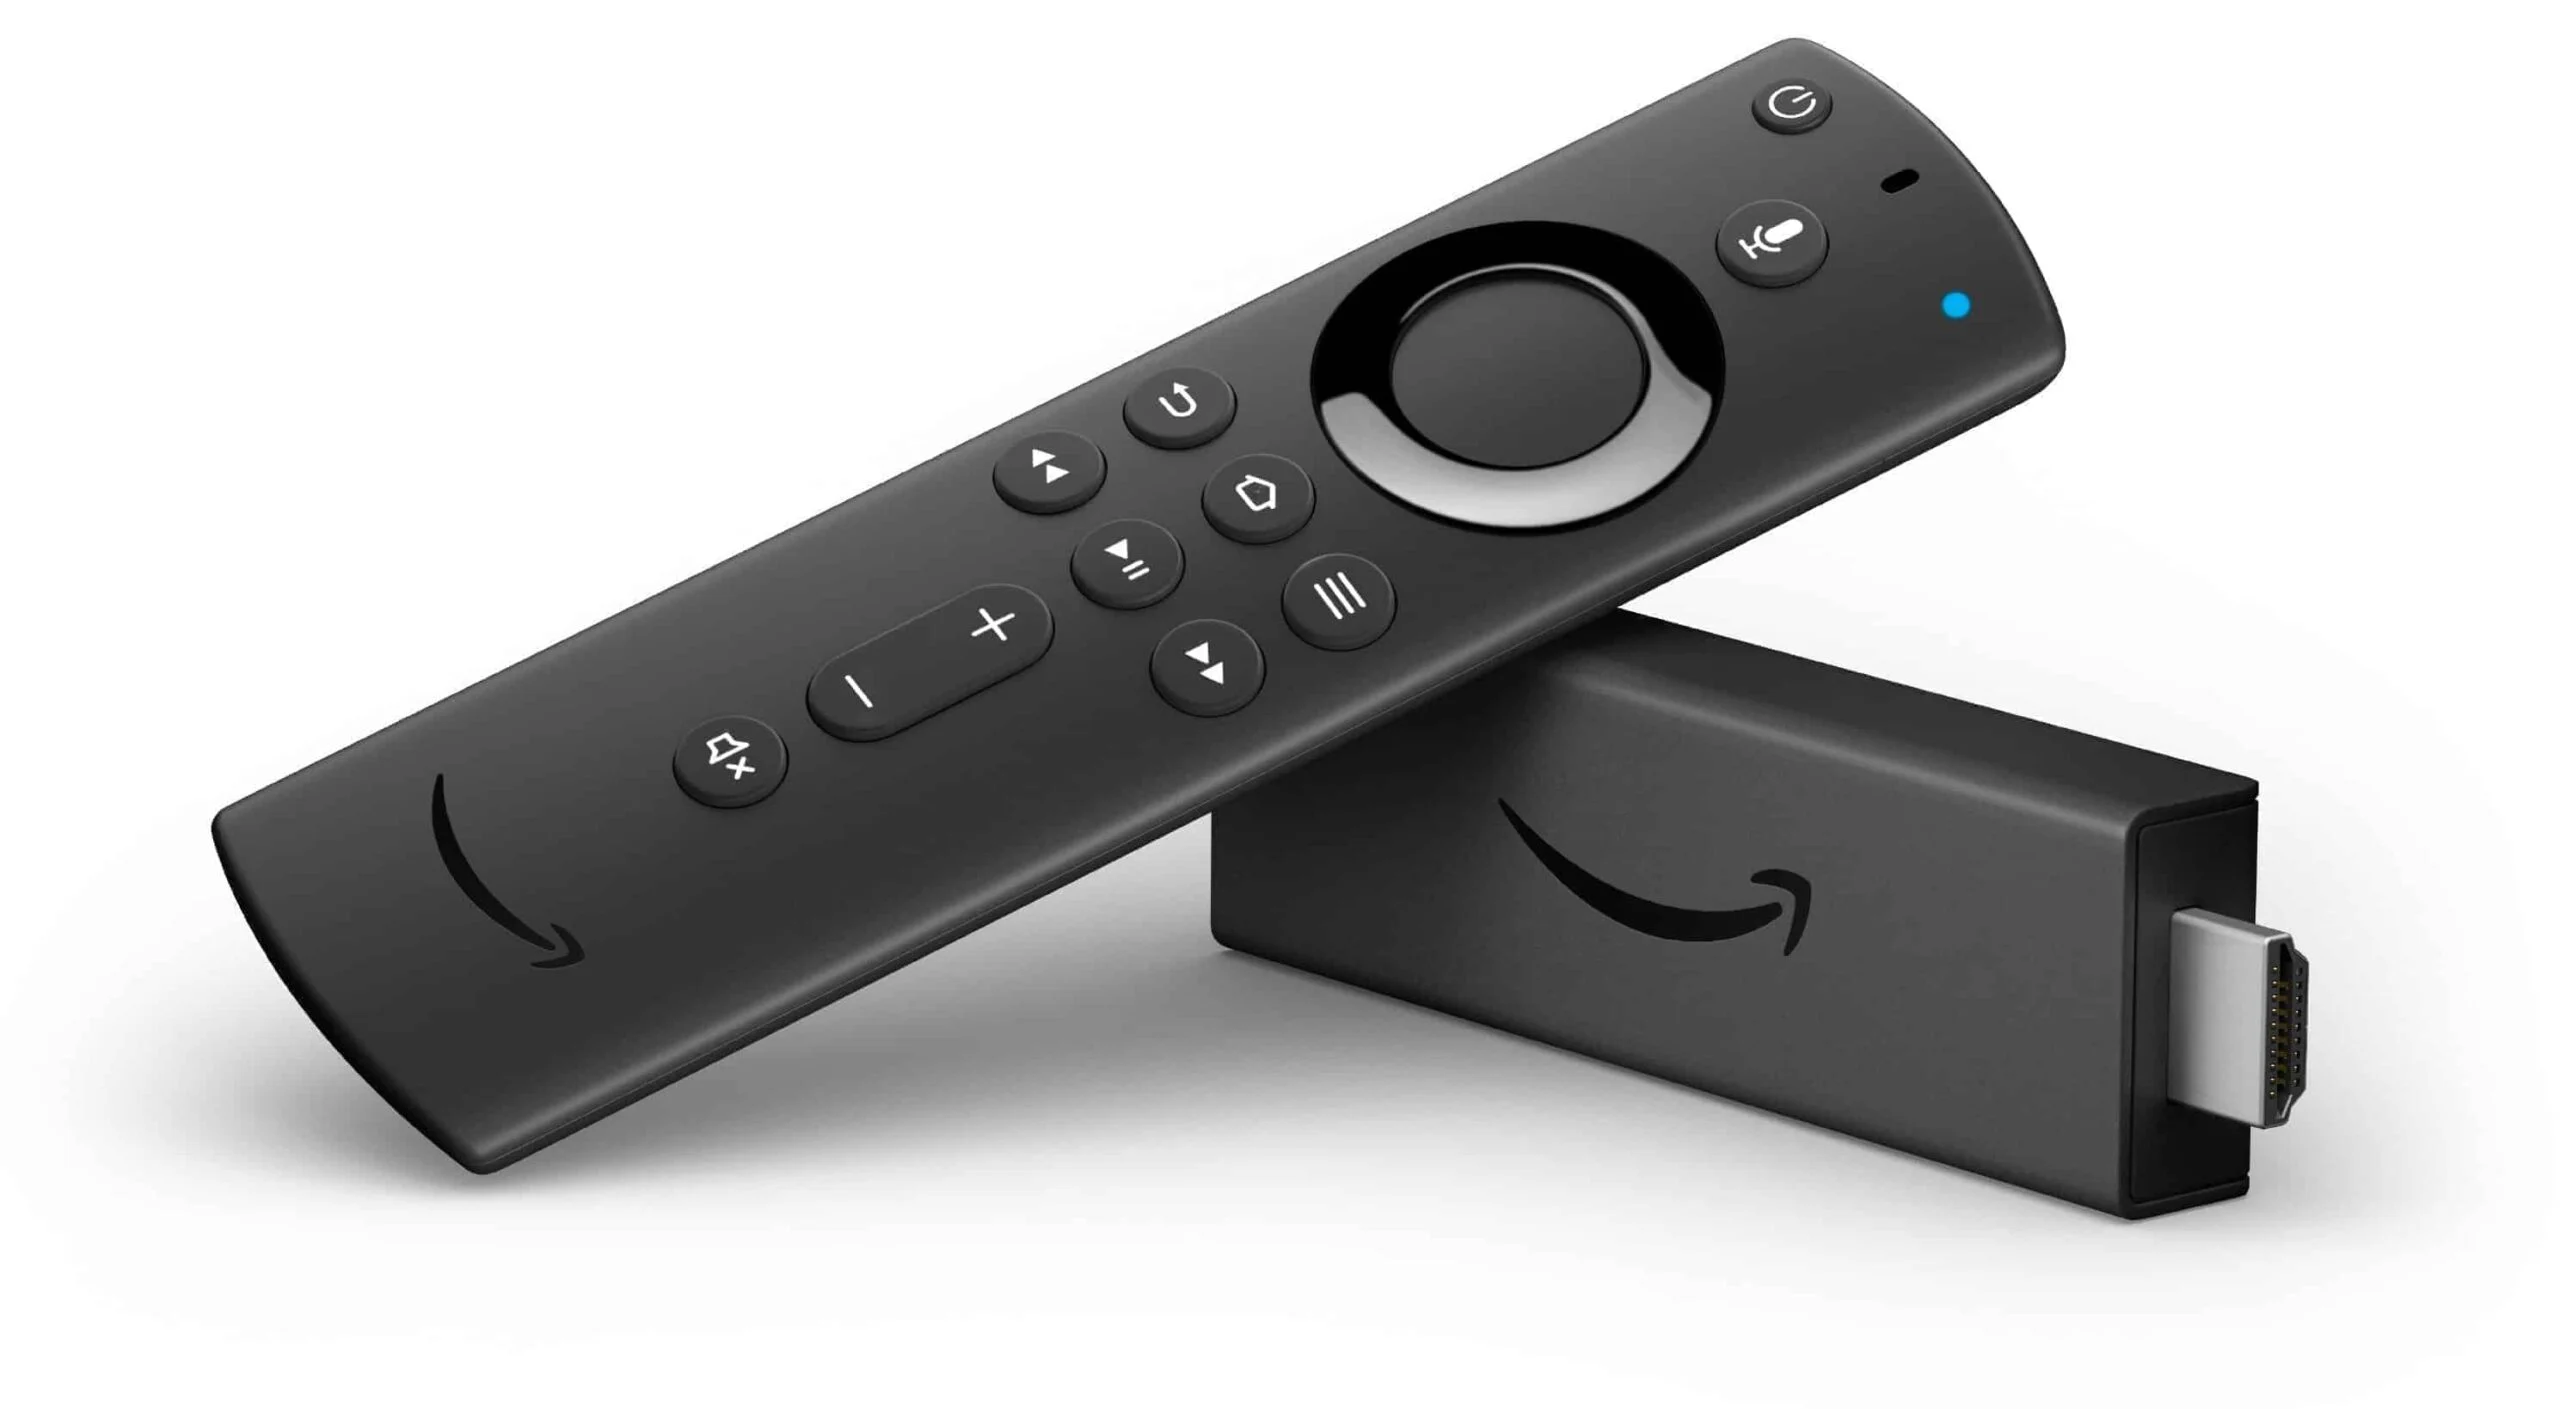 Illegal Amazon Fire Stick Users May Now Face Consequences for Engaging in Illegal Streaming